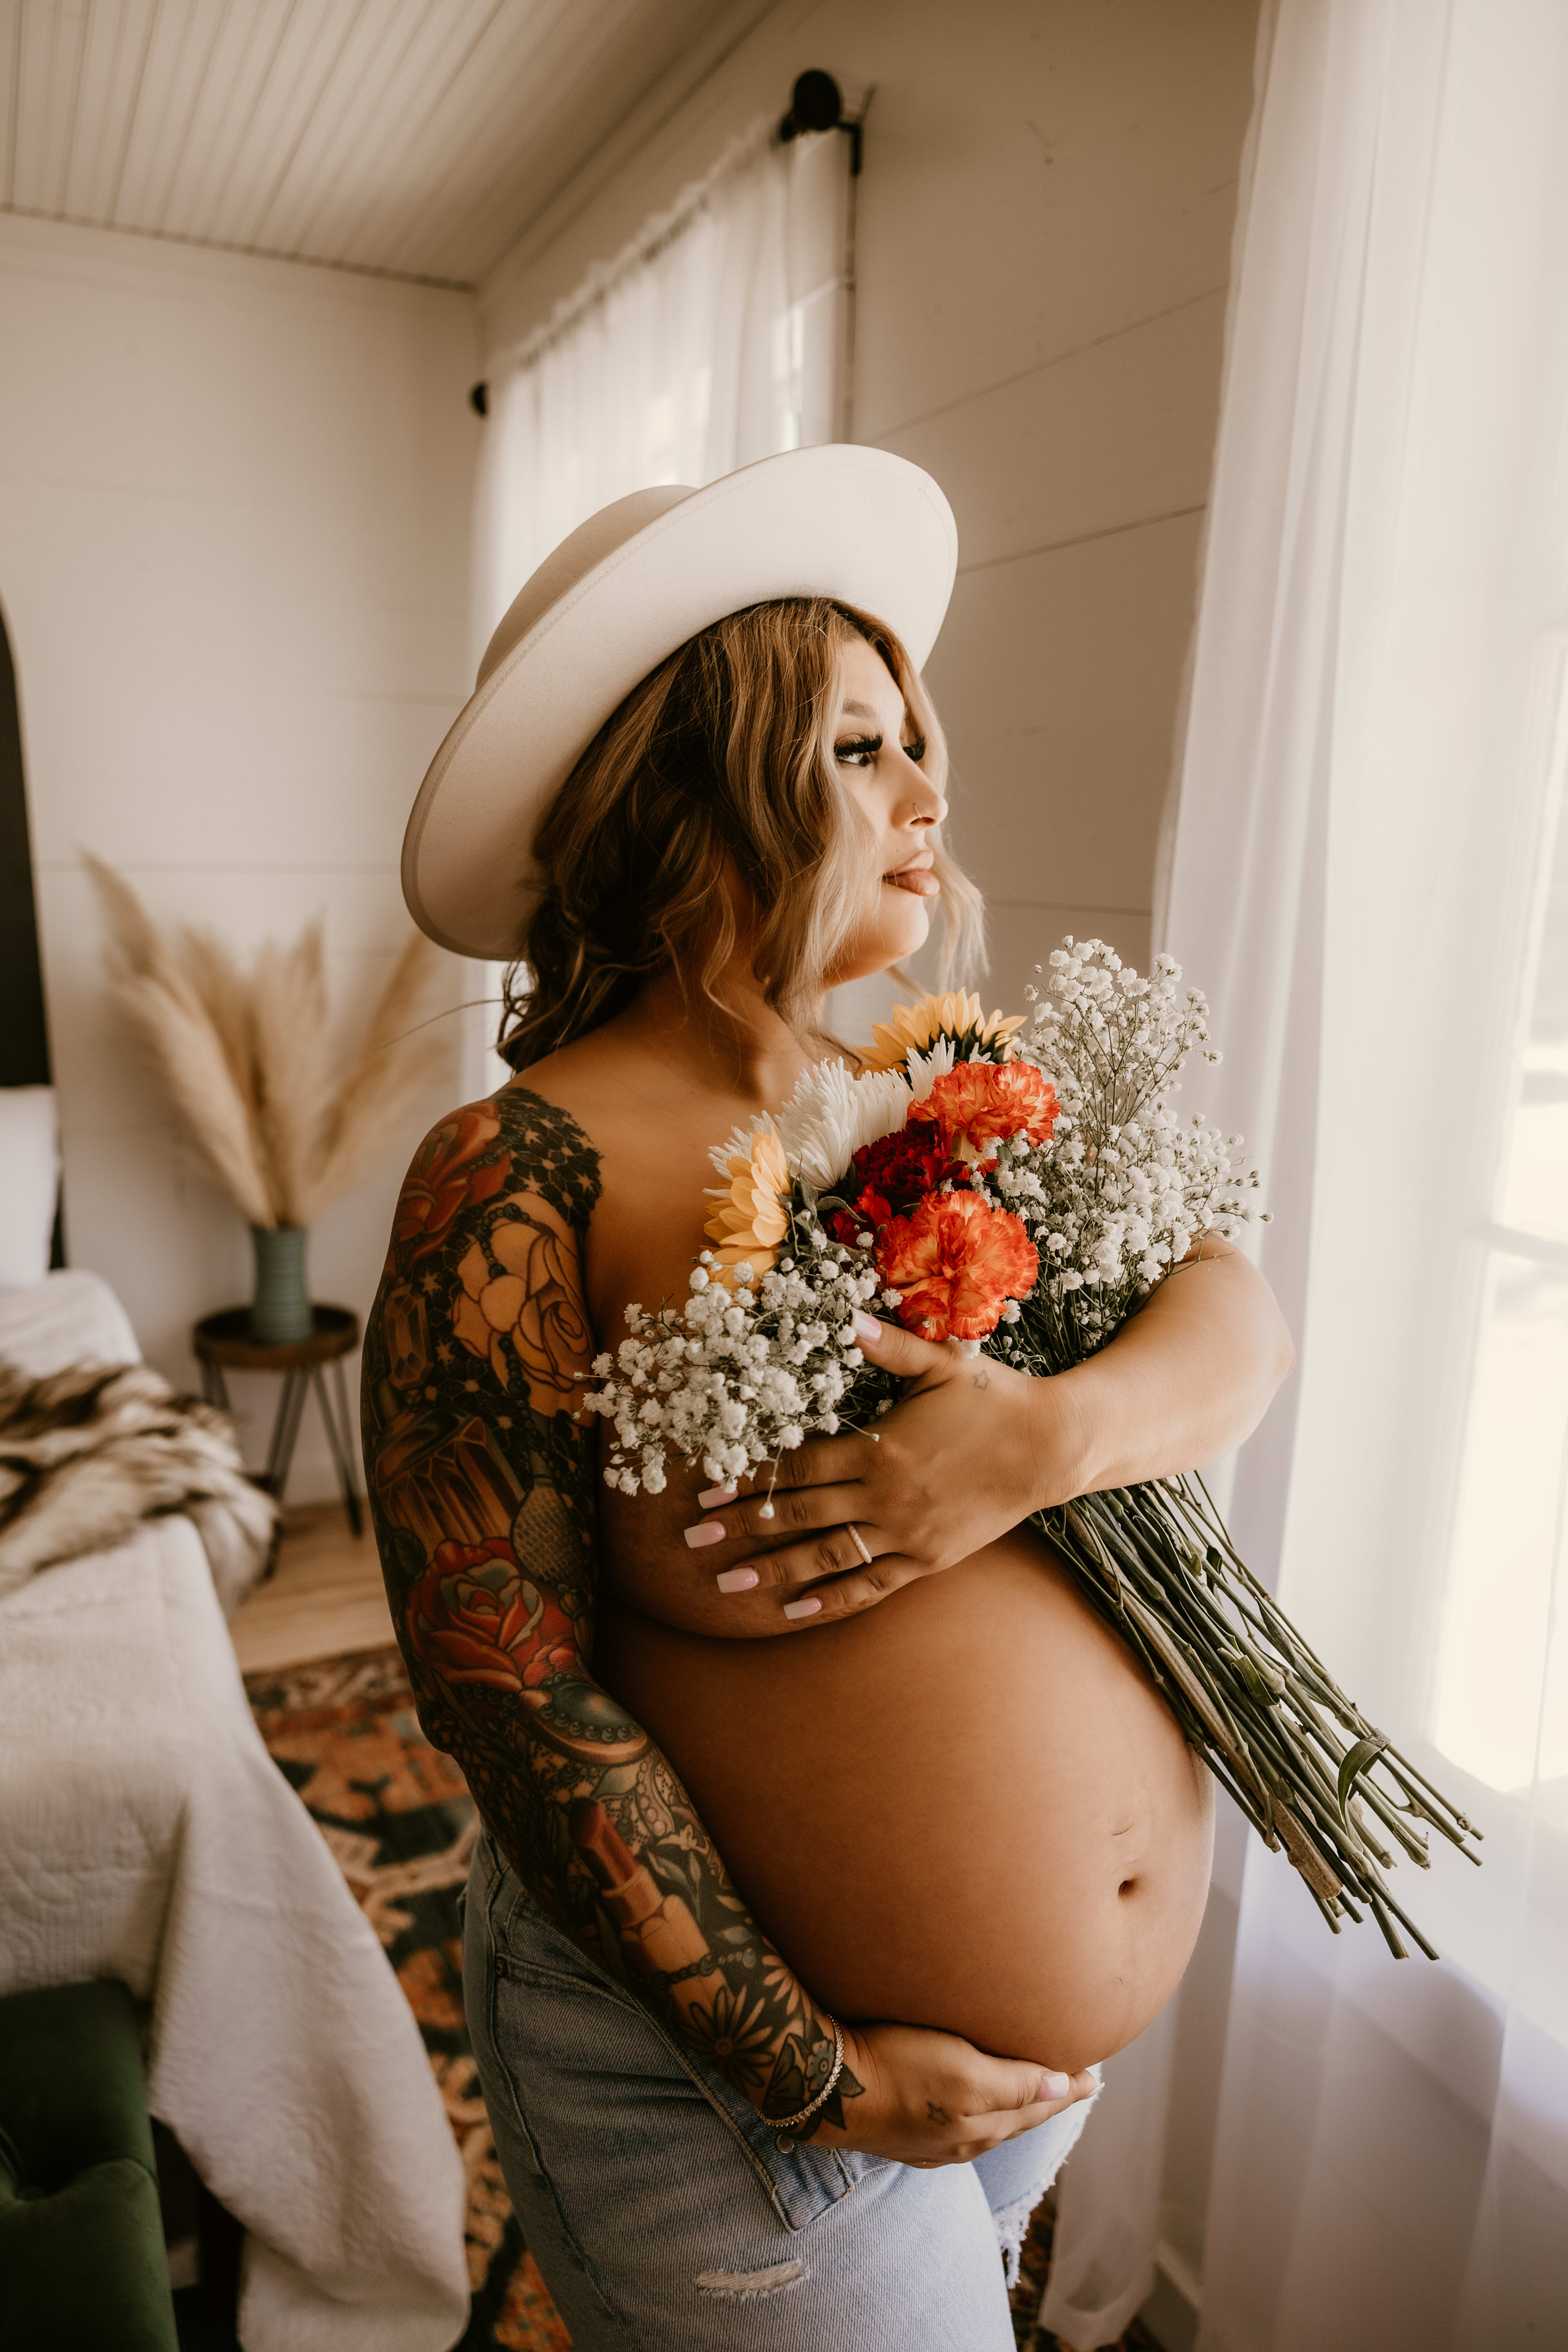 A pregnant woman wearing a white hat and holding flowers for her boho maternity photo shoot.